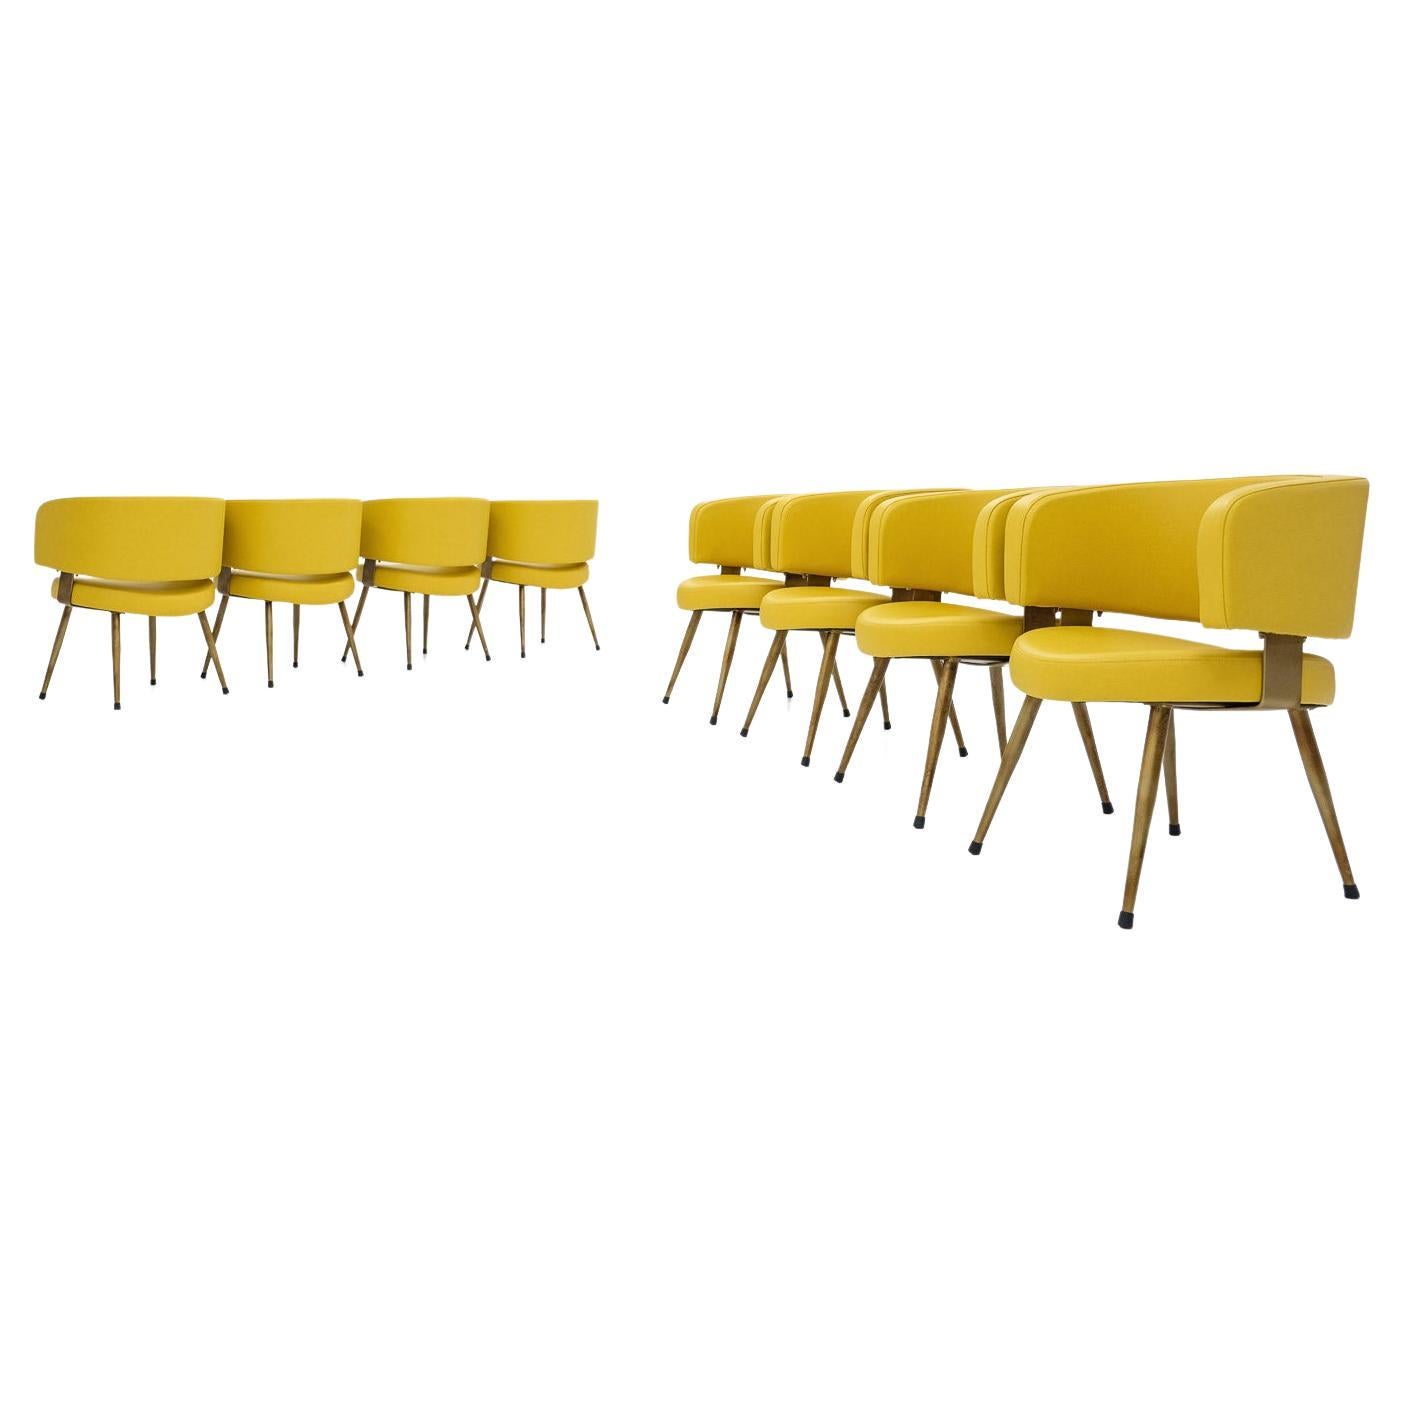 Set of 8 Italian armchairs, newly upholstered in yellow leatherette & metal base For Sale